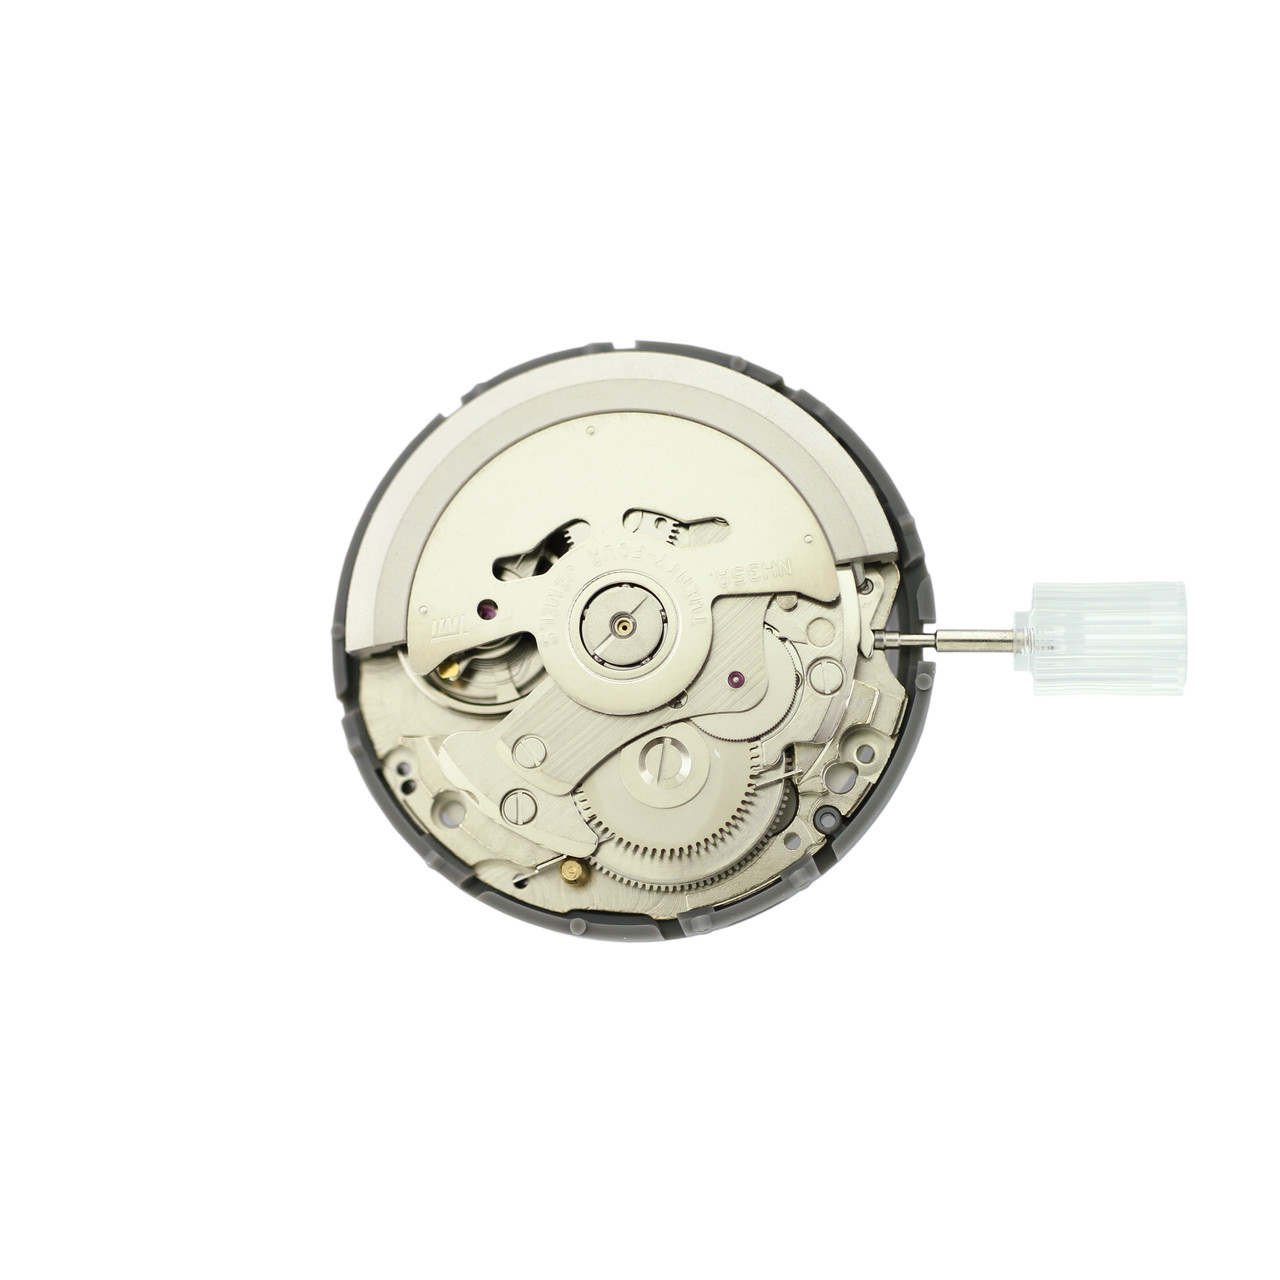 TMI NH35 White Watch Movement Watch Parts WatchMaterial